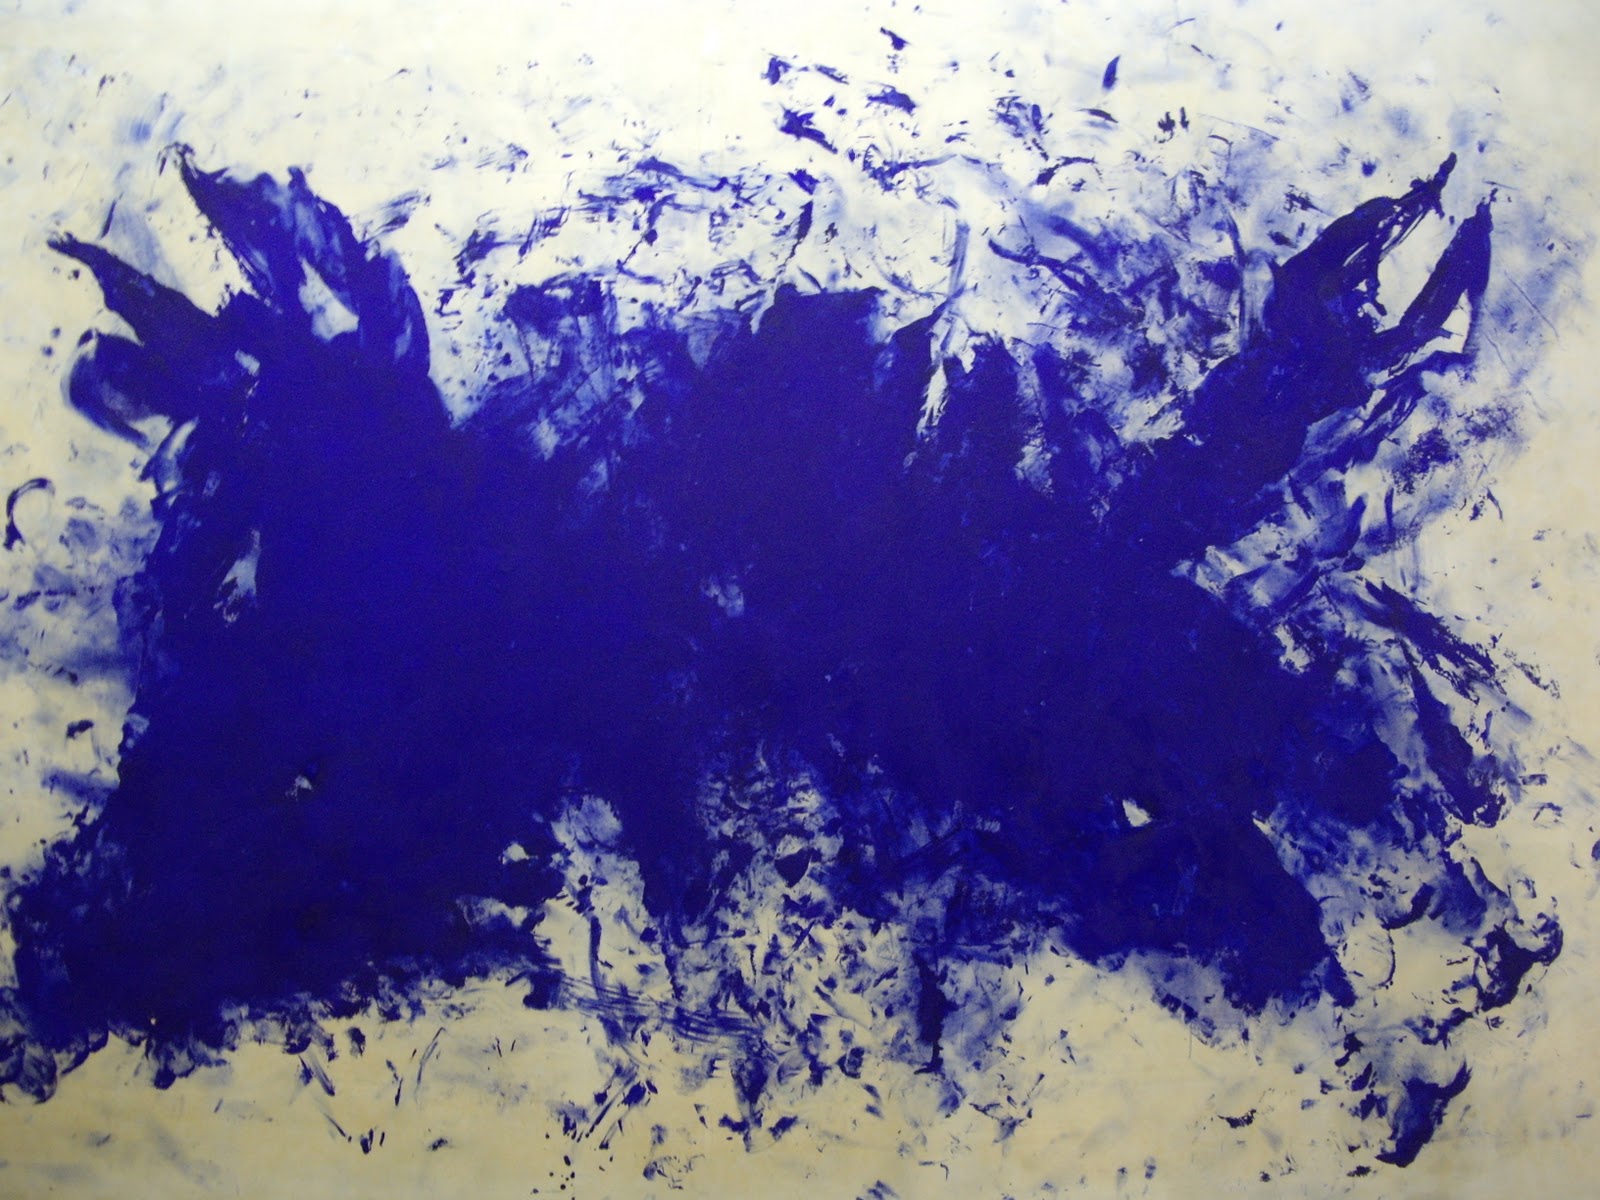 Great blue cannibalism, Tribute to Tennessee Williams by Yves Klein - 1960 - 276 x 418 cm Centre Pompidou